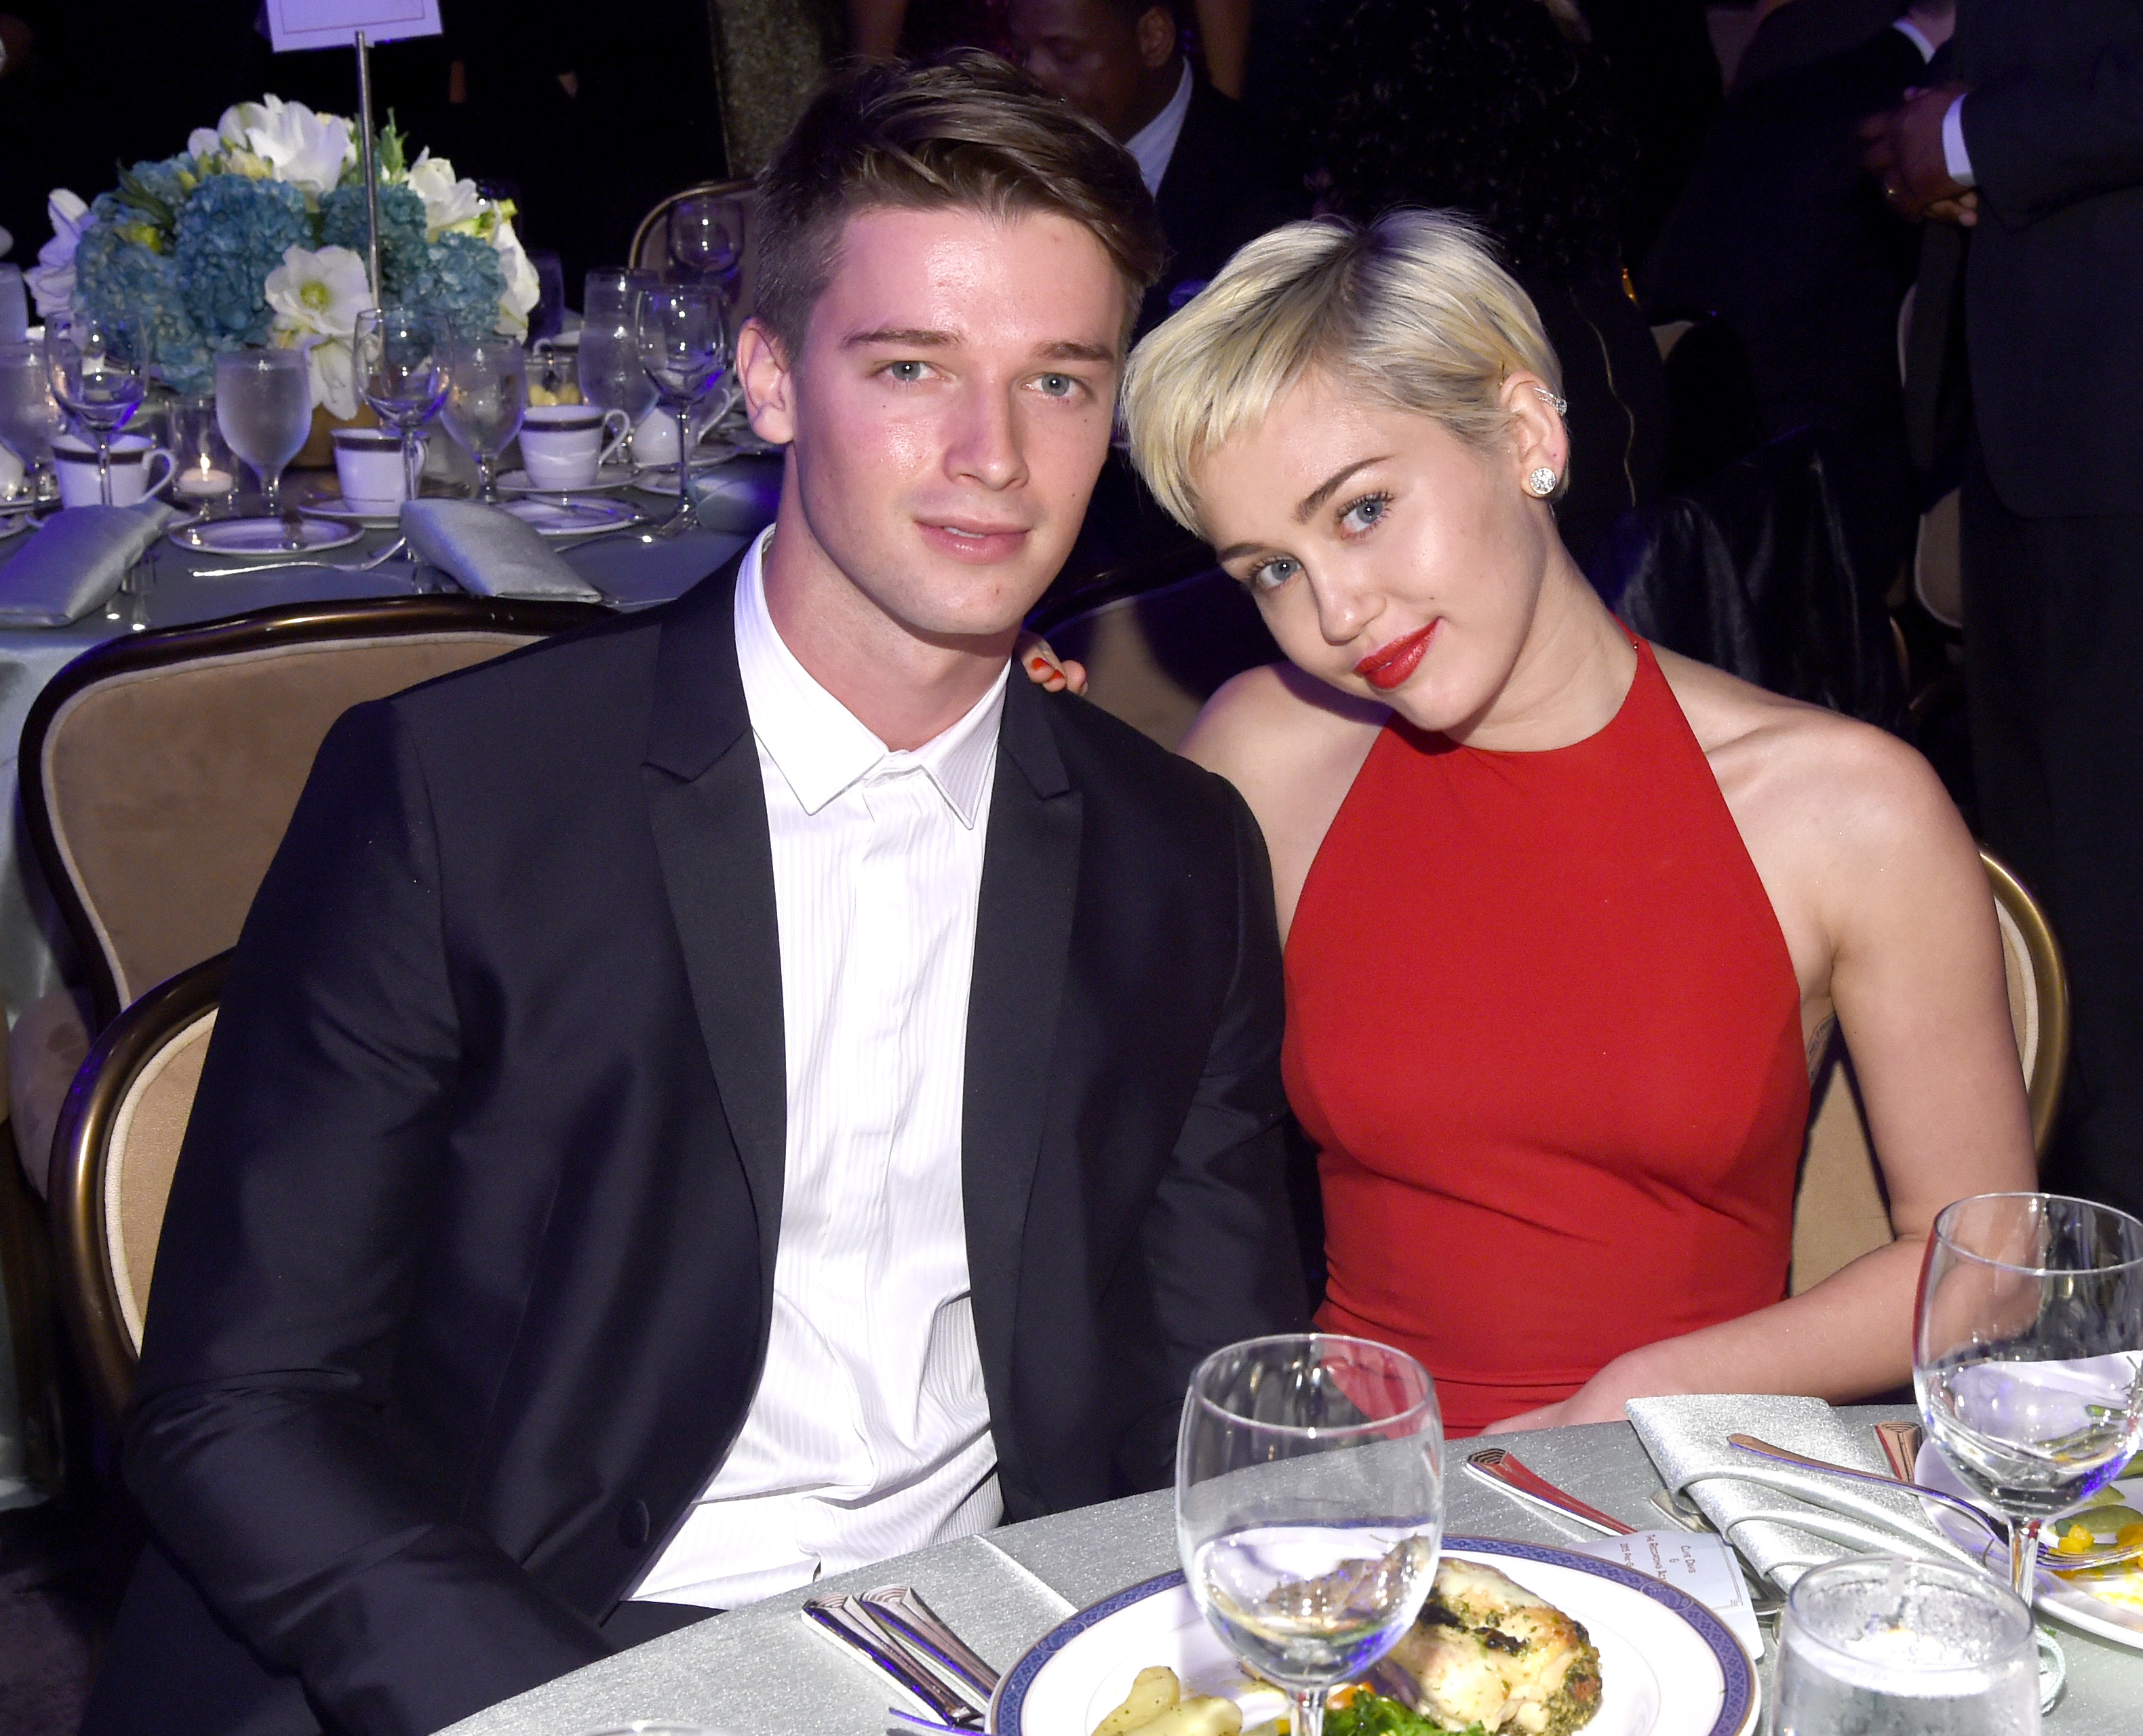 Patrick and Miley sitting at a dinner table at an awards show